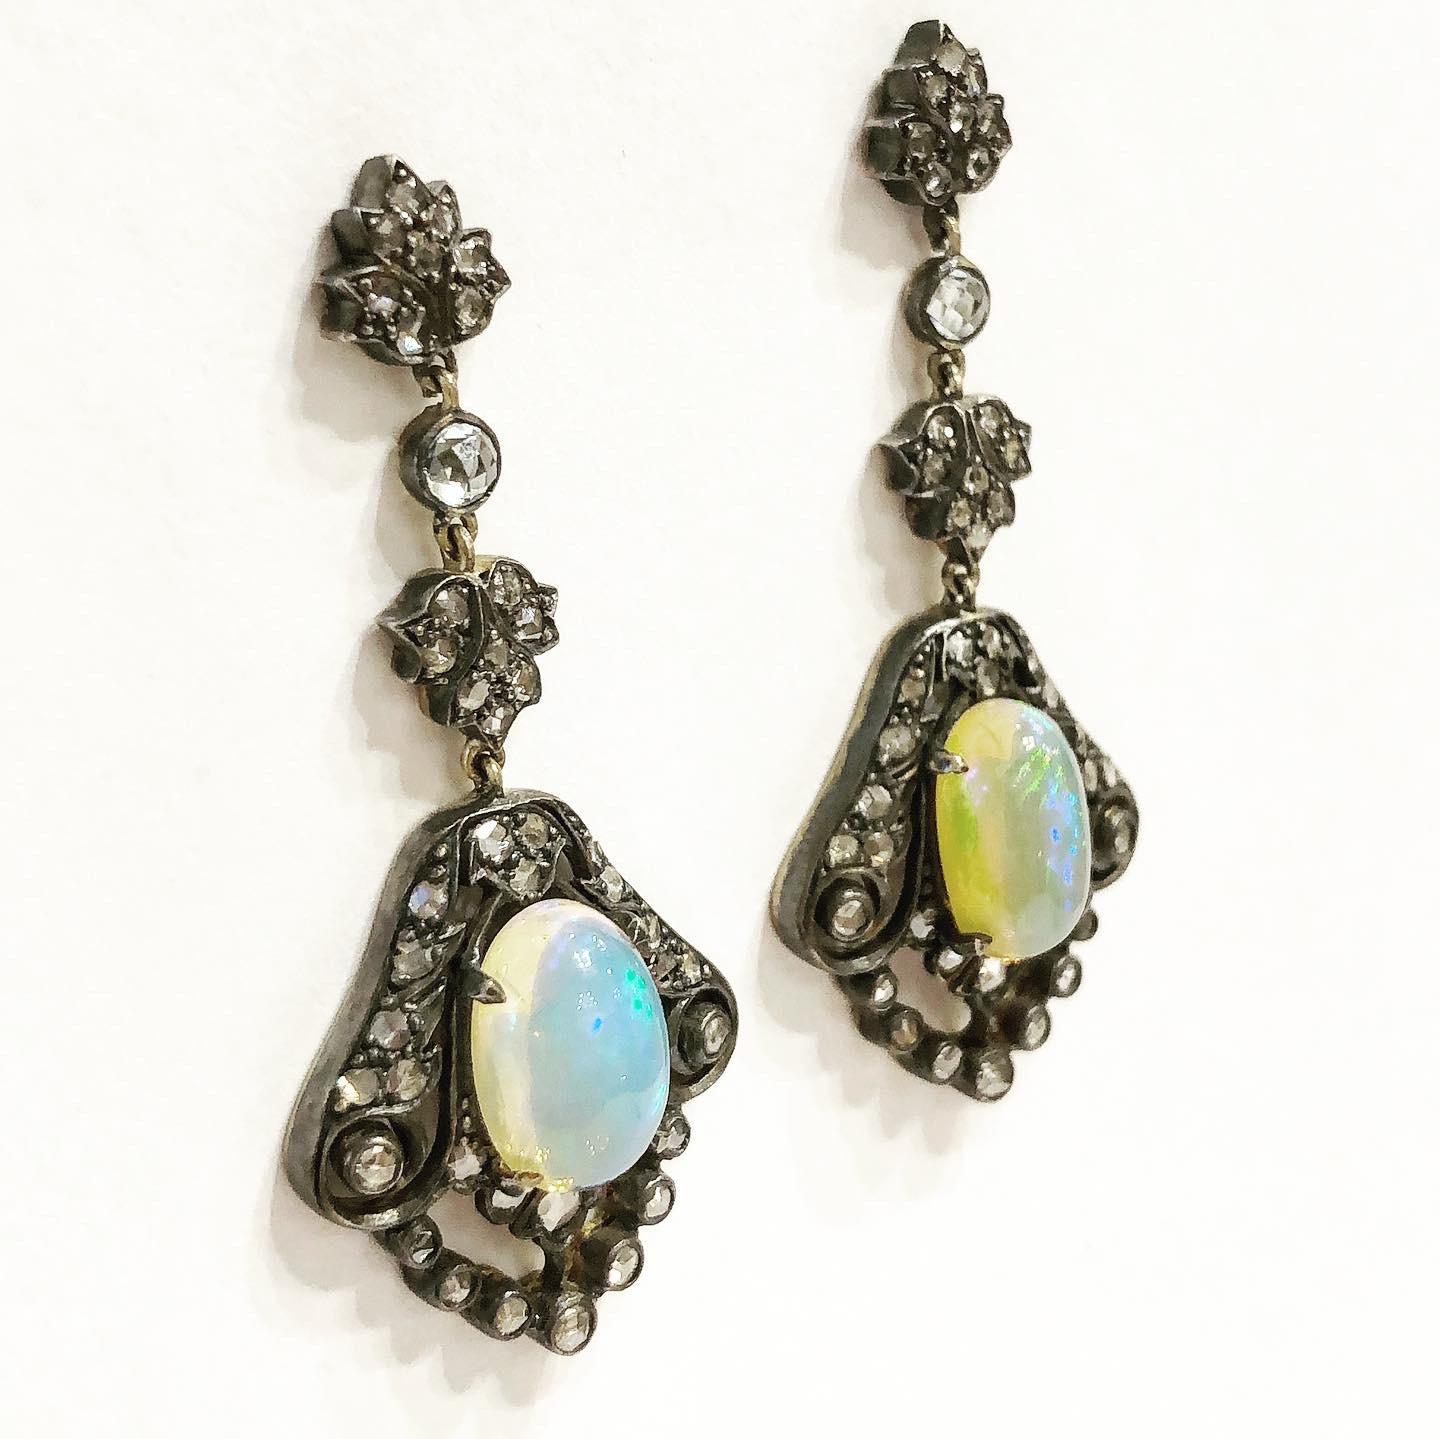 Dainty 18 karat yellow gold, silver, opals and diamonds stud drop earrings.
Metal: 18k gold, silver.
Stud and clutch system.
Probably France, 19th century, circa 1840. Condition: Good.
Old mine cut diamonds. Cabochon cut opal.
Total